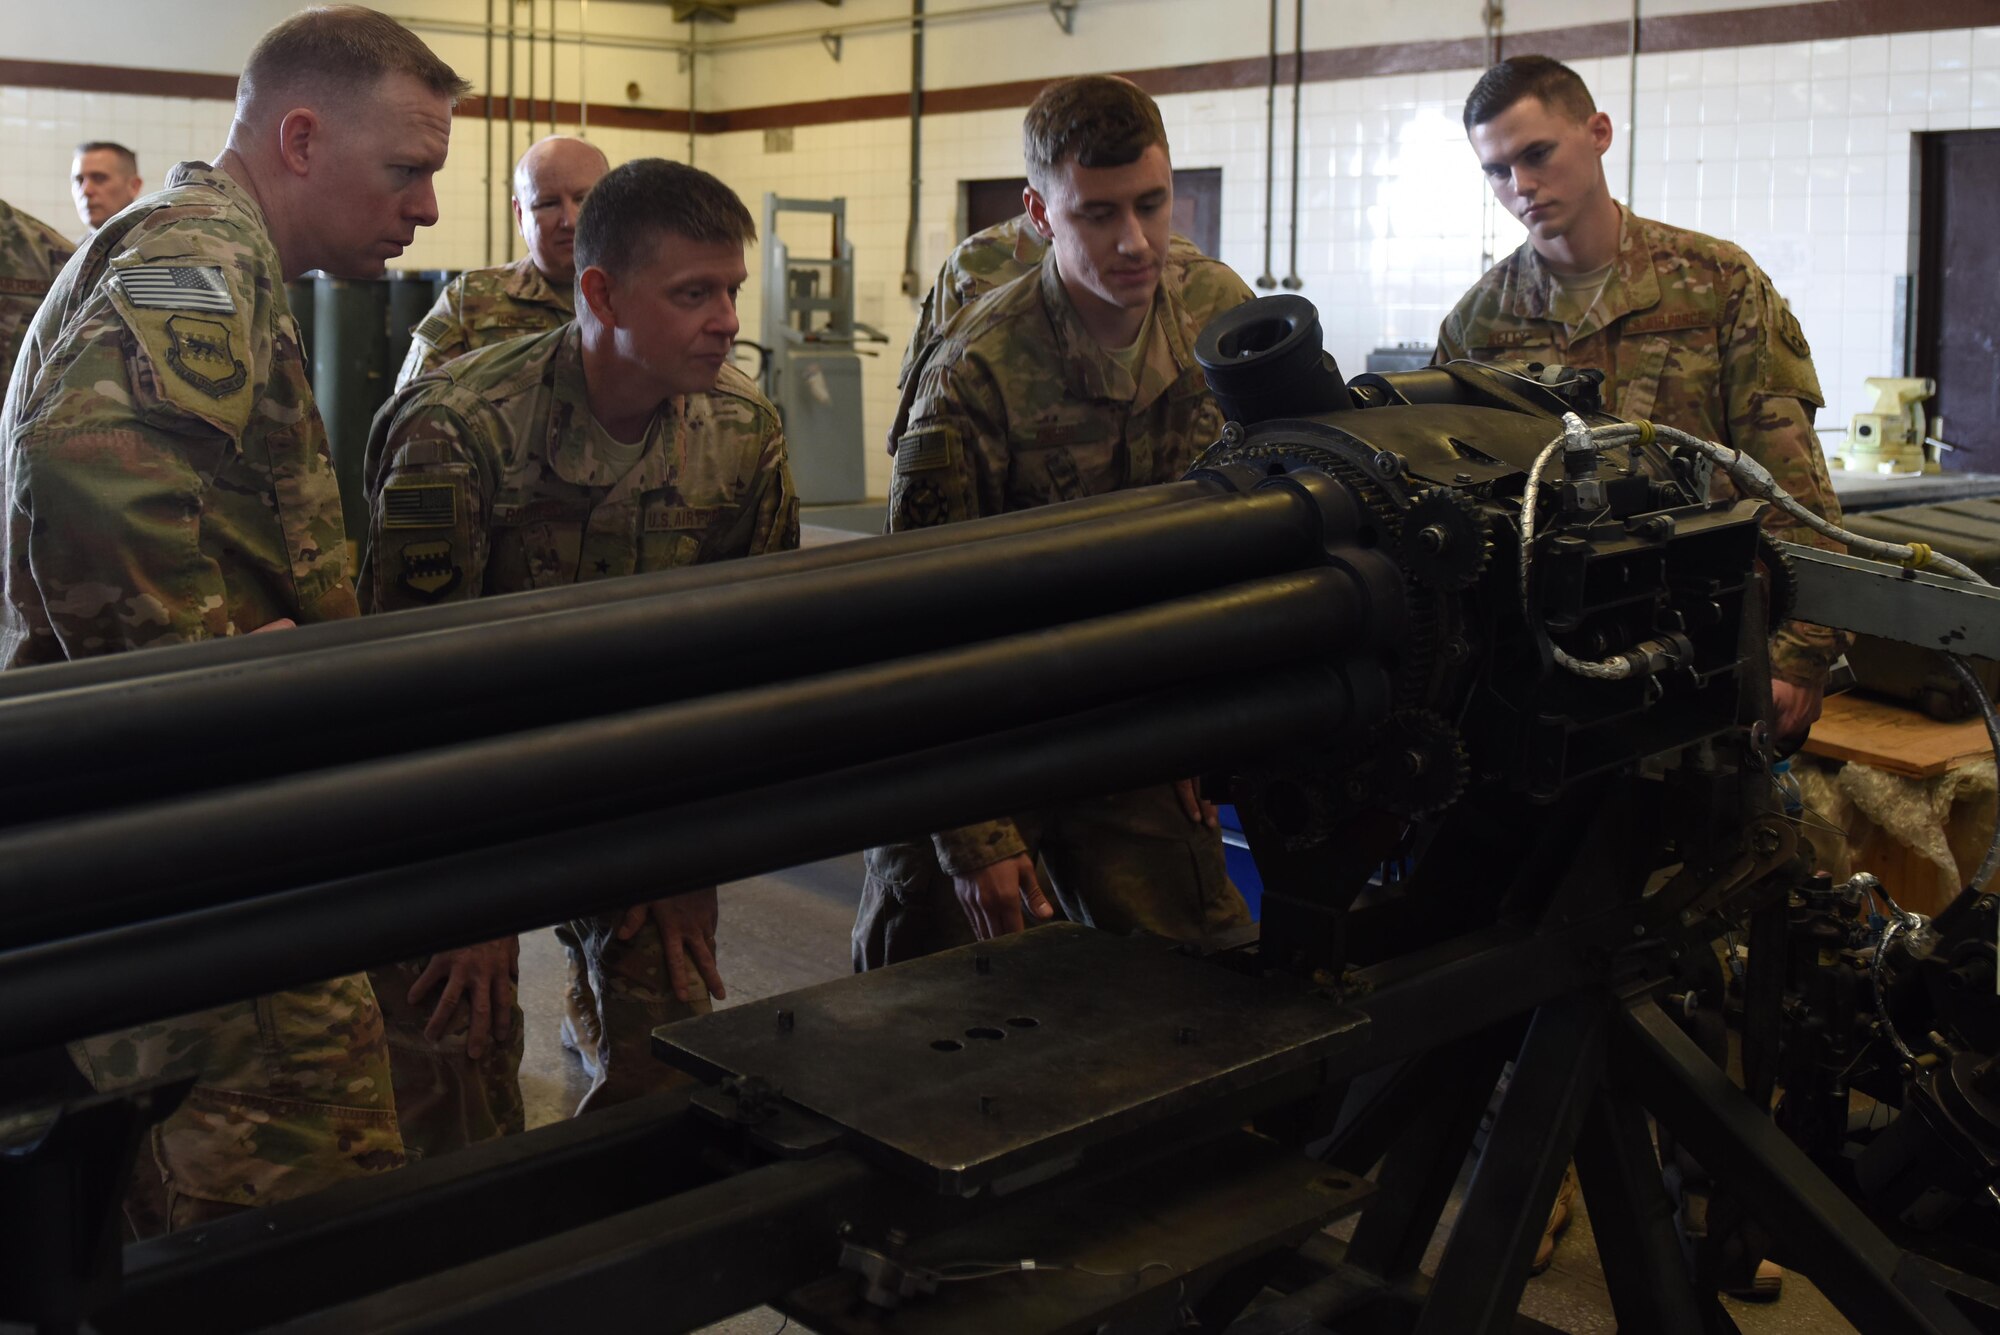 Airmen from the 447th Expeditionary Aircraft Maintenance Squadron and U.S. Air Force Brig. Gen. Kyle Robinson, 332nd Air Expeditionary Wing commander, inspect a 30 millimeter GAU-8 Avenger seven-barrel Gatling Gun undergoing repairs Nov. 7, 2017, at Incirlik Air Base, Turkey.